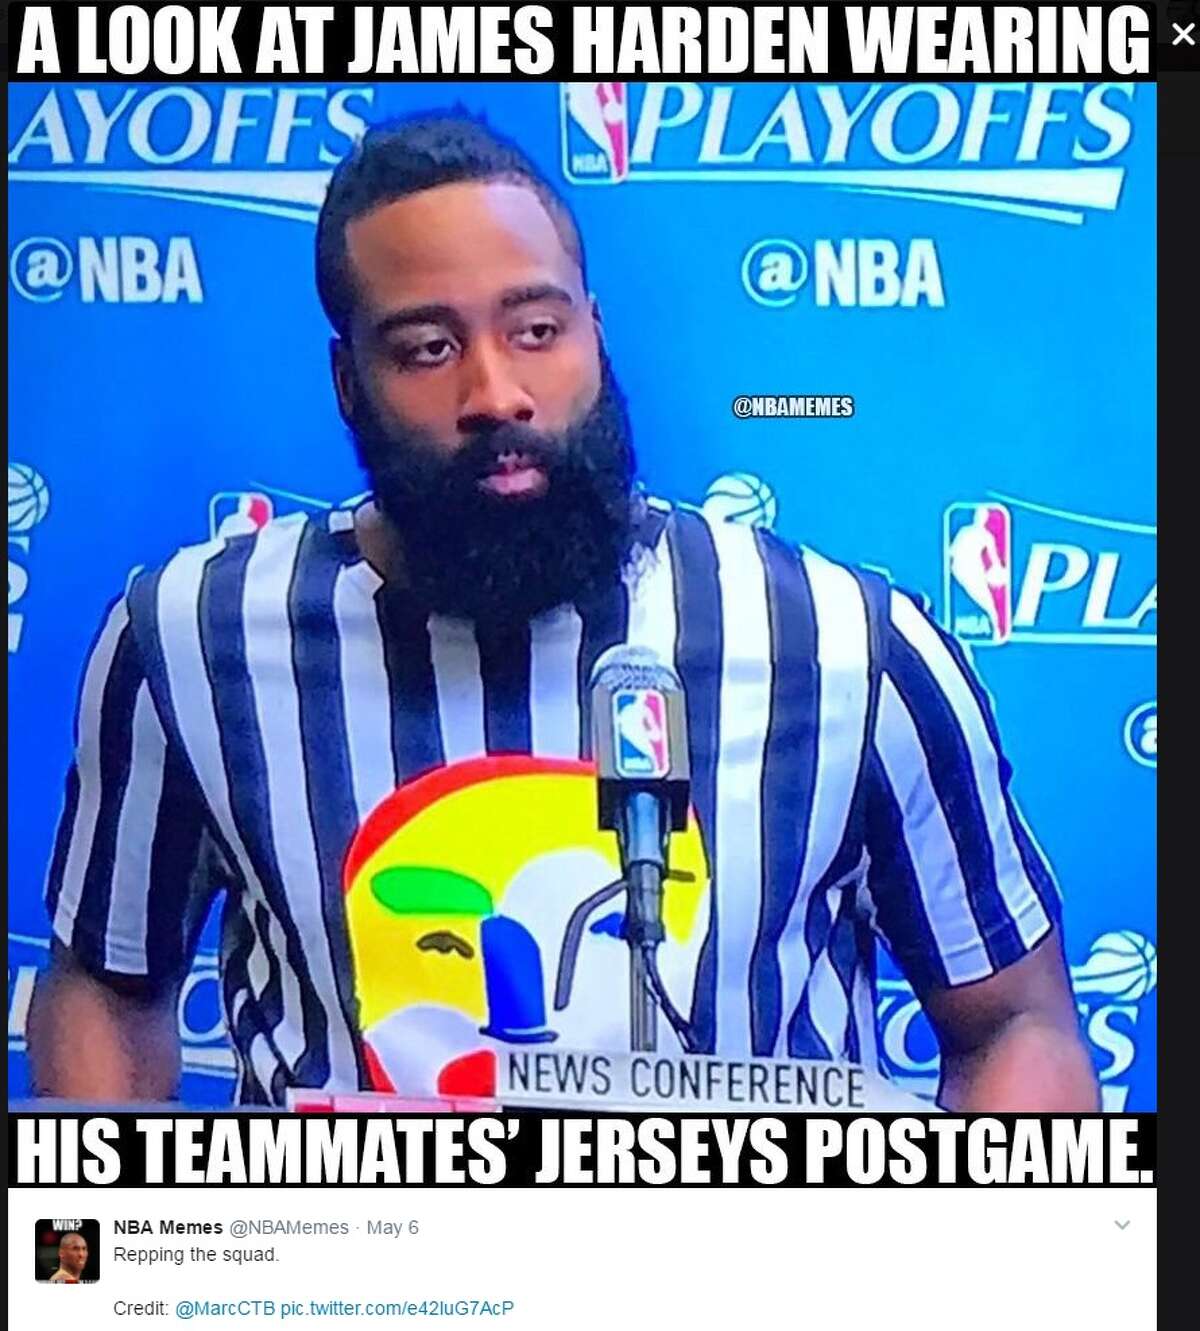 The latest NBA memes of the 2017 playoffs. Image source: Twitter